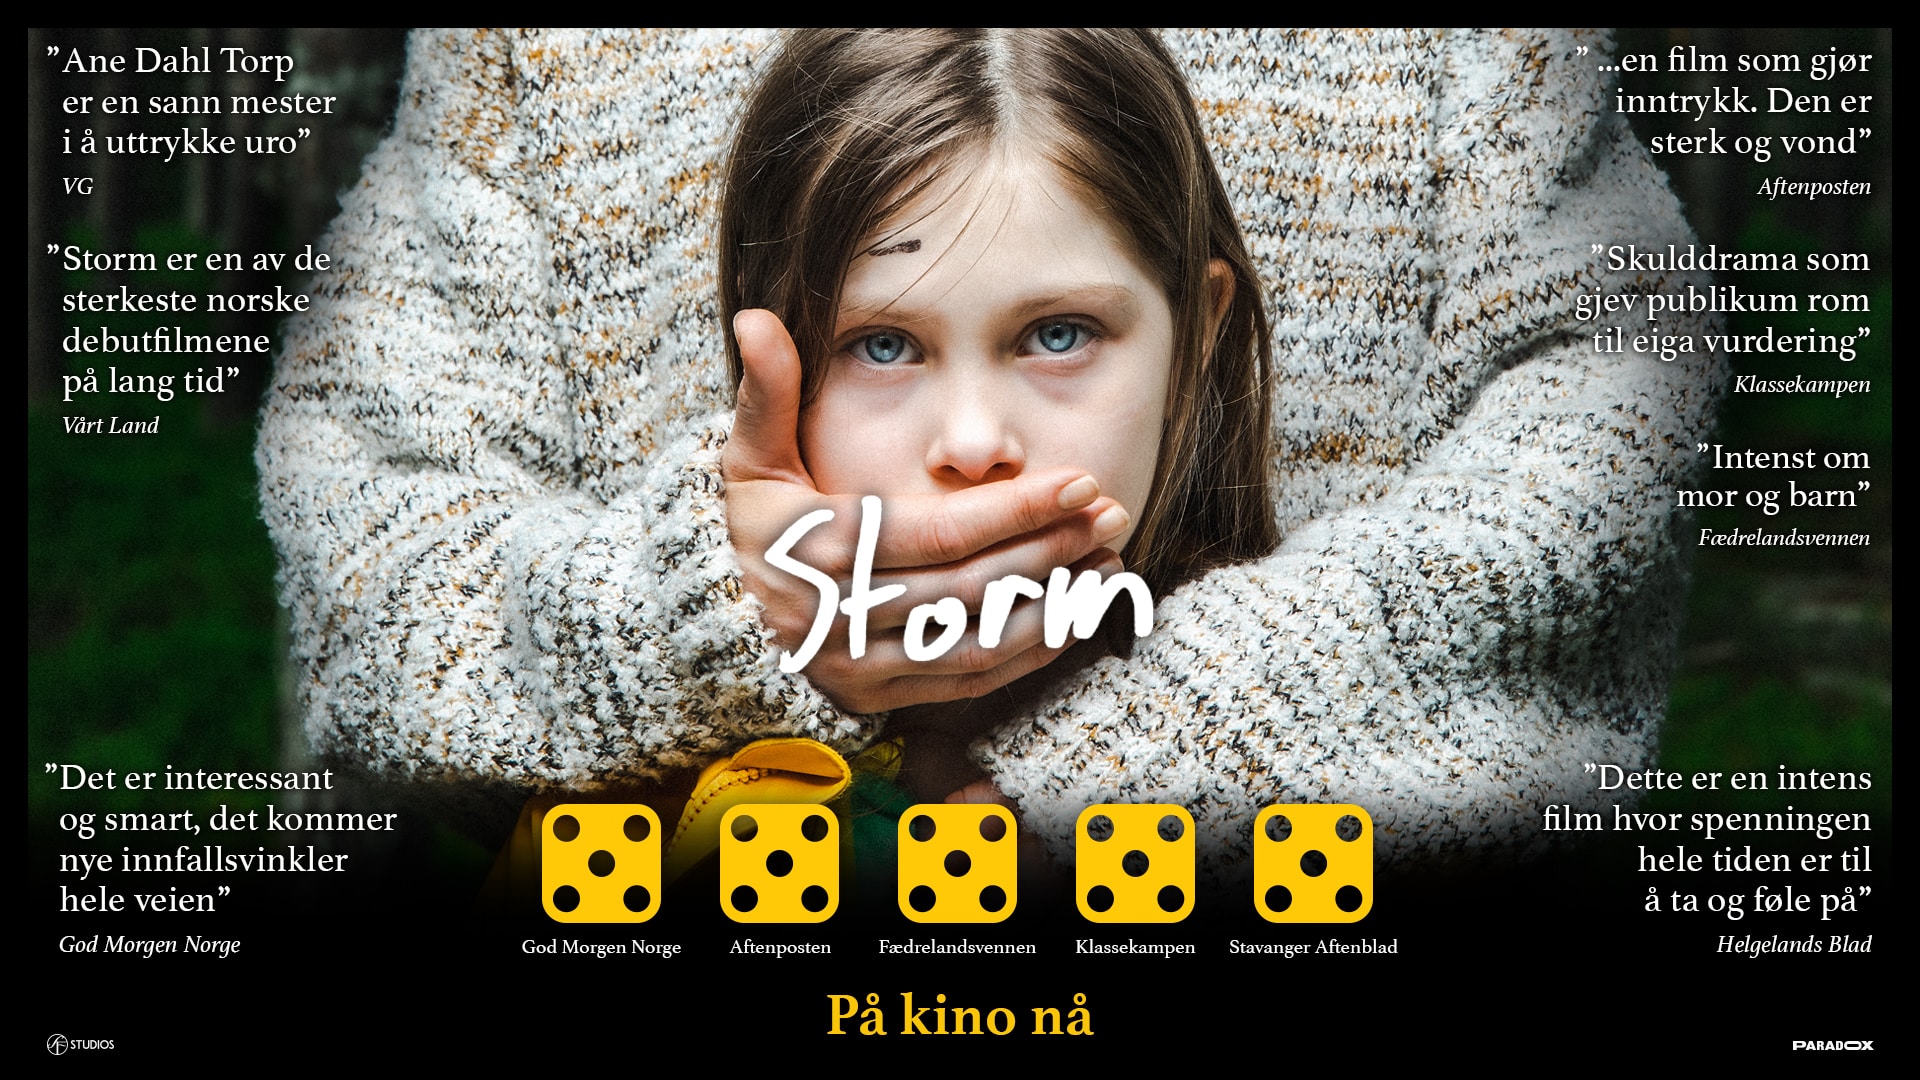 A woman holding over a childs mouth on on the promotional poster for movie Storm.